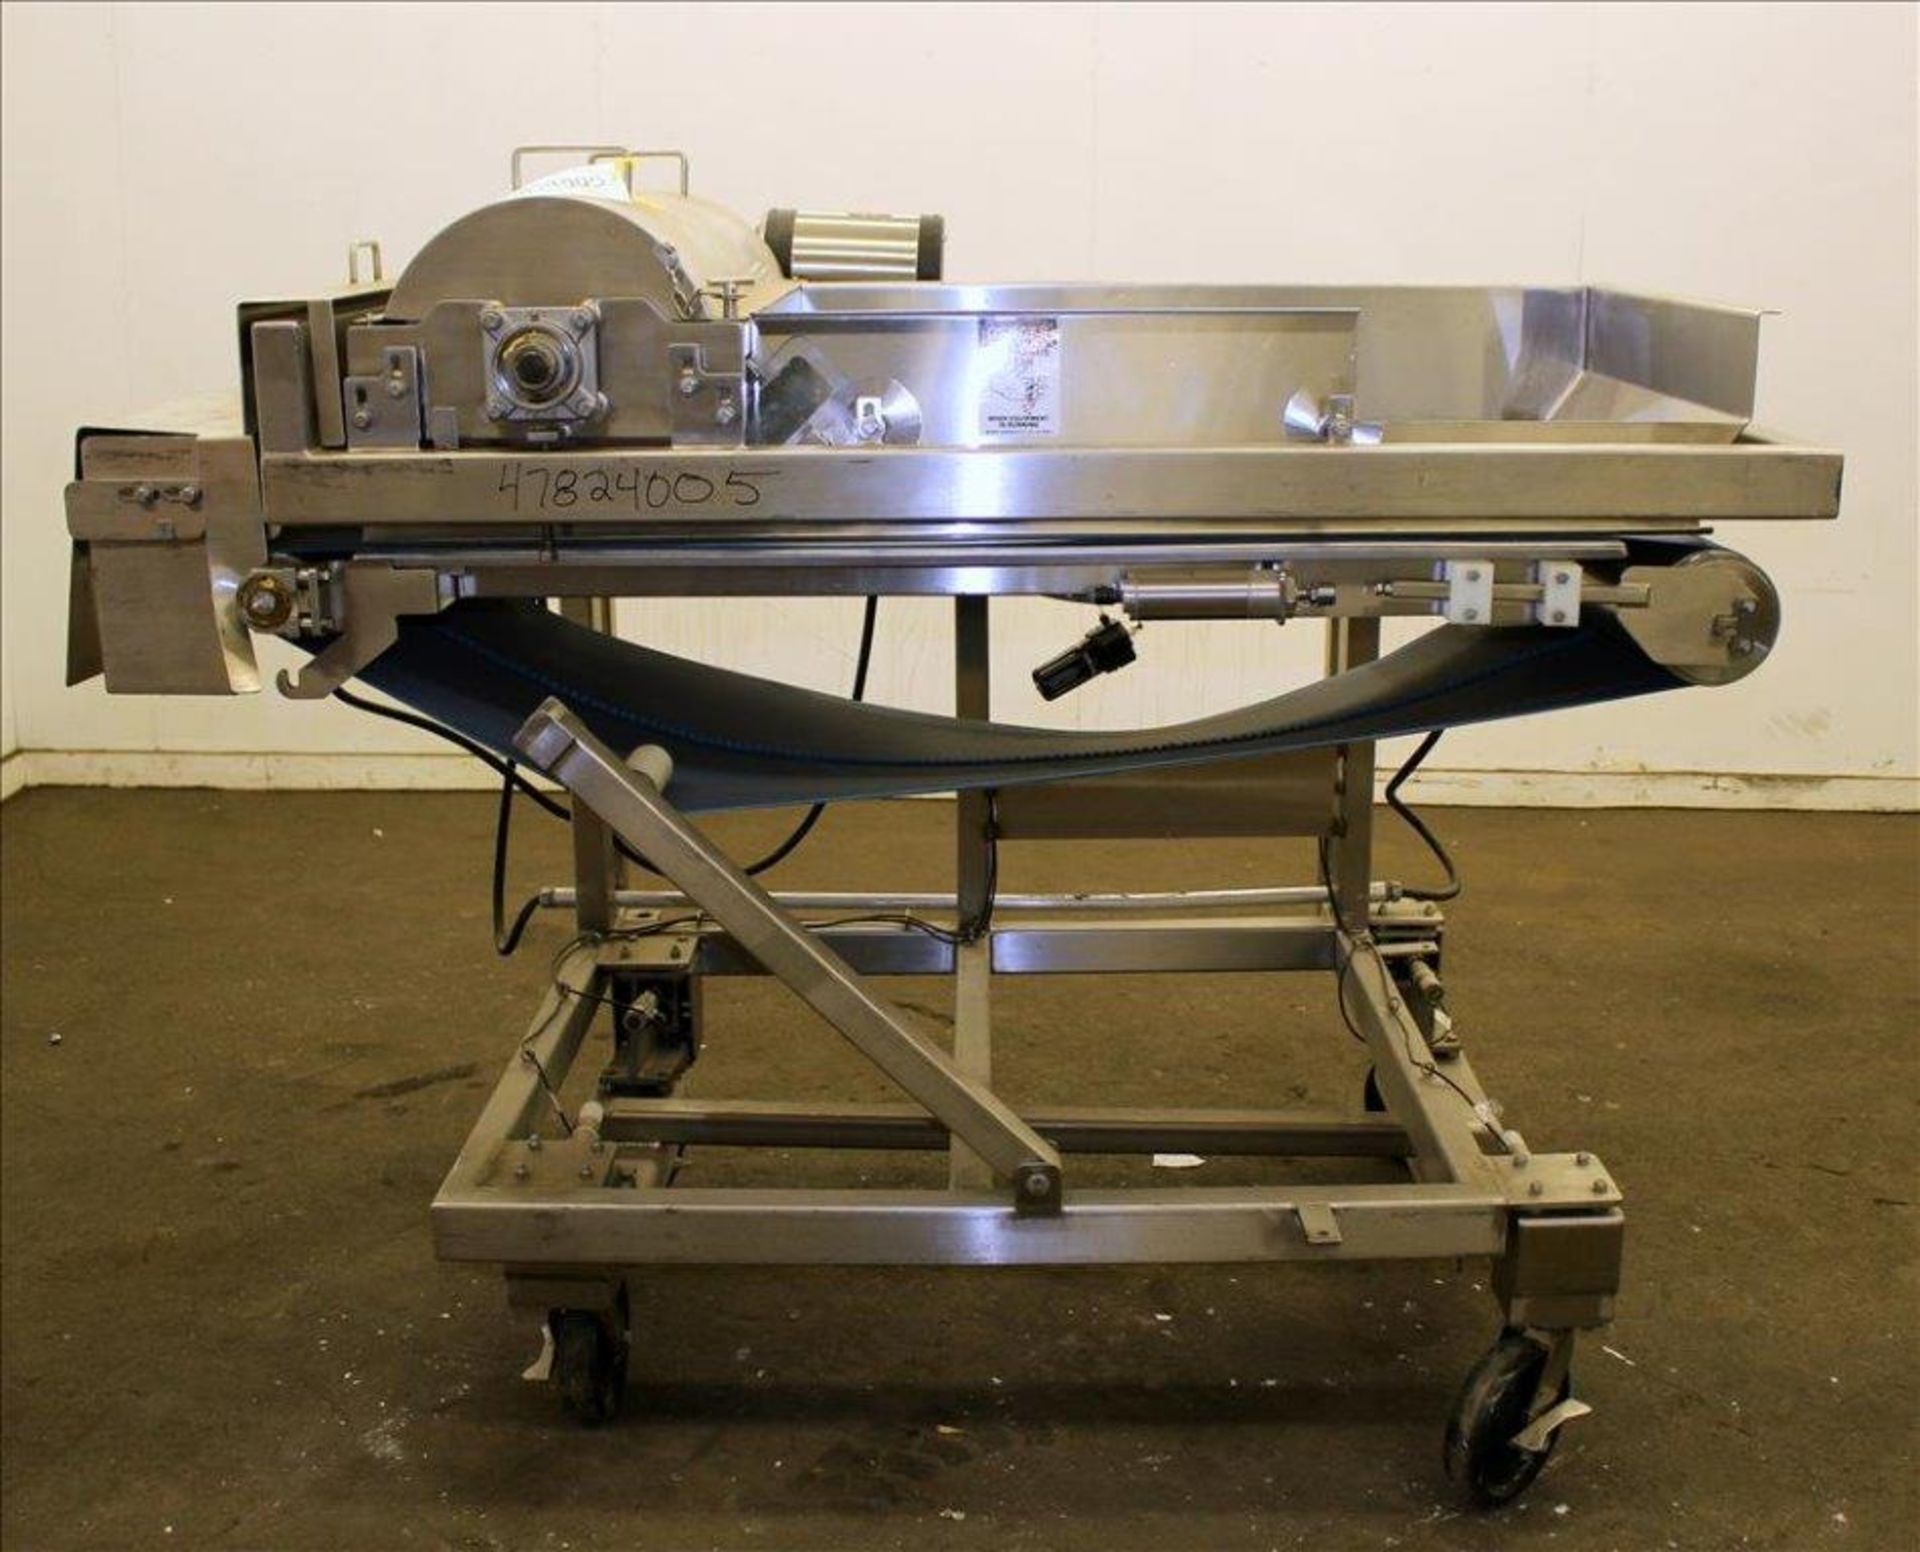 Loos Machine & Automation Waterfall Type Applicator, 304 Stainless Steel. Has approximate 28-1/2"